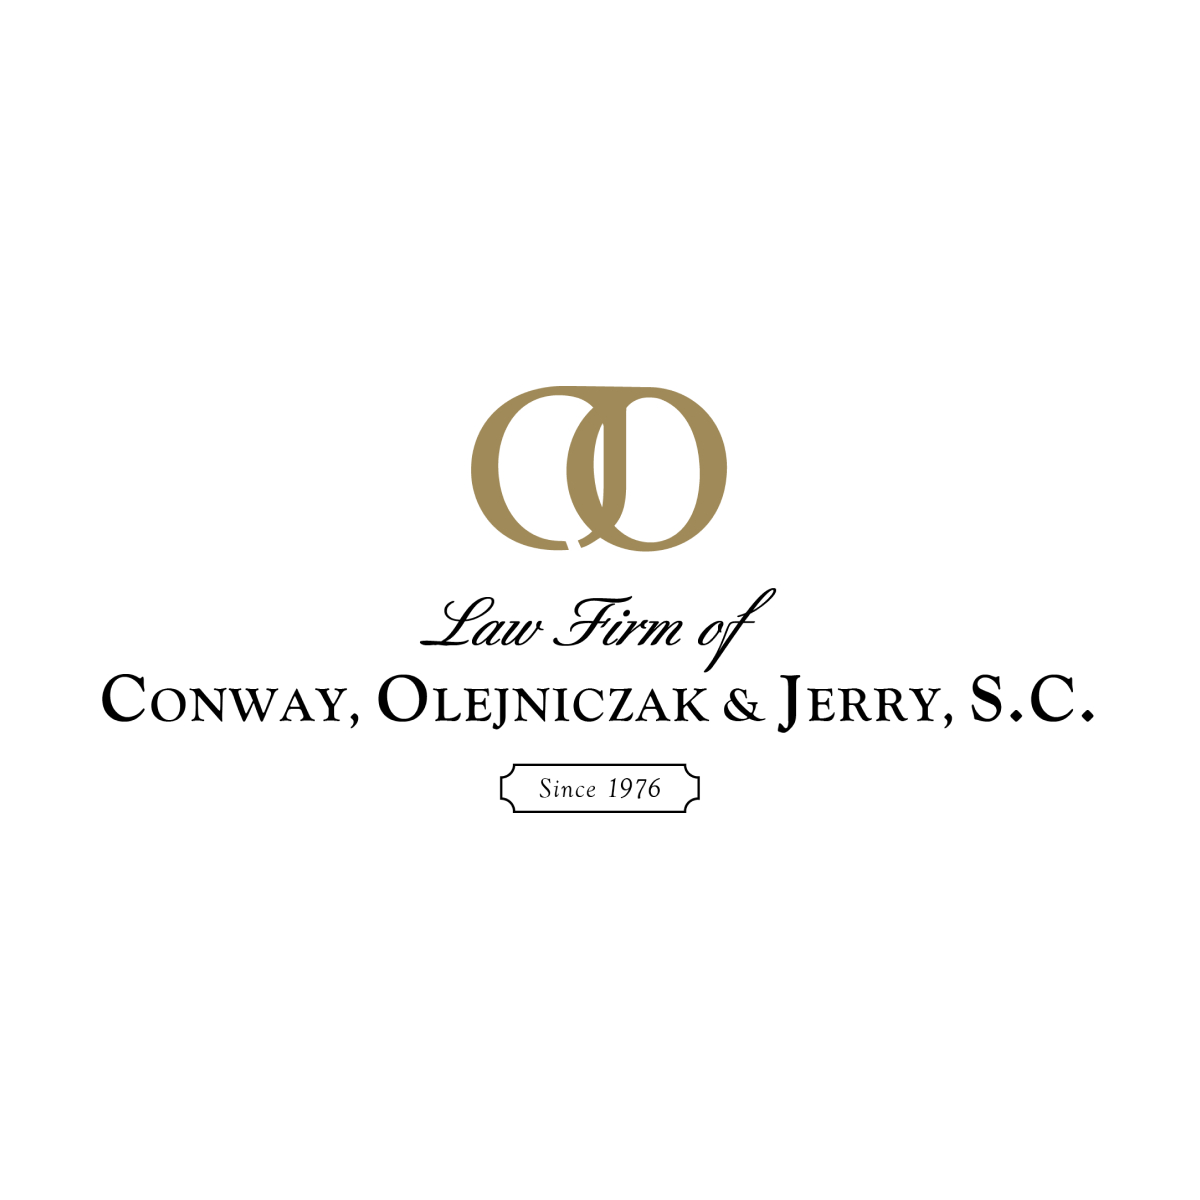 Photo of map[image:/uploads/conway-olejniczak-jerry-logo-with-padding.jpg name:Law Firm of Conway, Olejniczak & Jerry, S.C. title:Law Firm of Conway, Olejniczak & Jerry, S.C.]